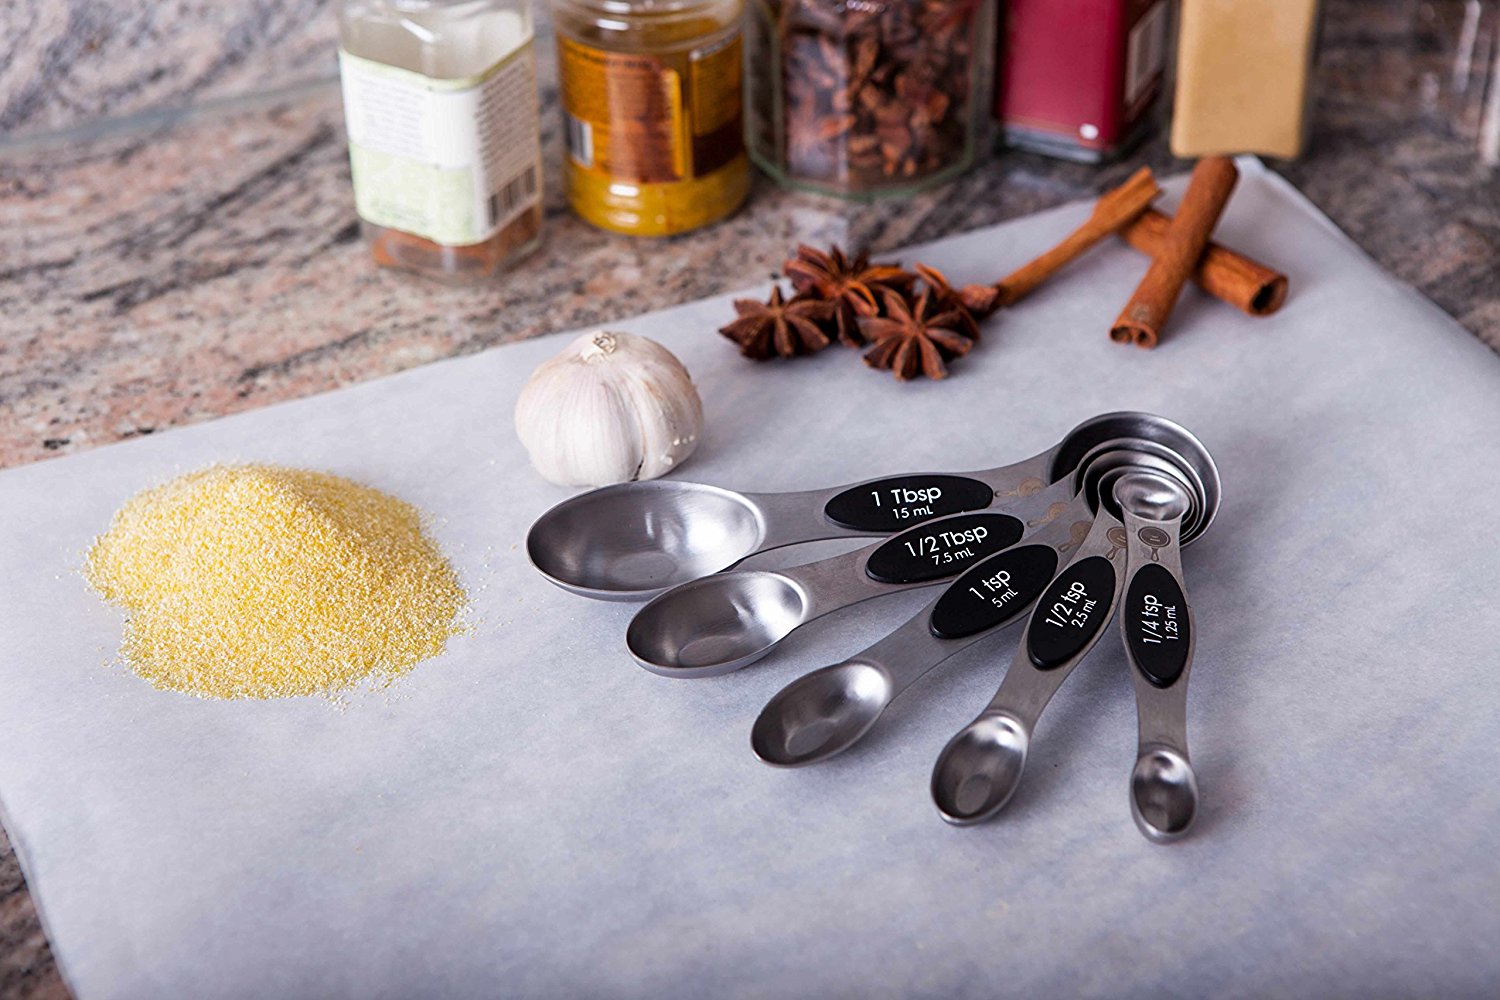 Premium Stackable Magnetic Measuring Spoon Set by Integrity Chef - Baker's Dream Gift, Stainless Steel 5-Piece Kit, Magnetic Snaps, Measure Dry & Liquid Ingredients, SAVE A LIFE!